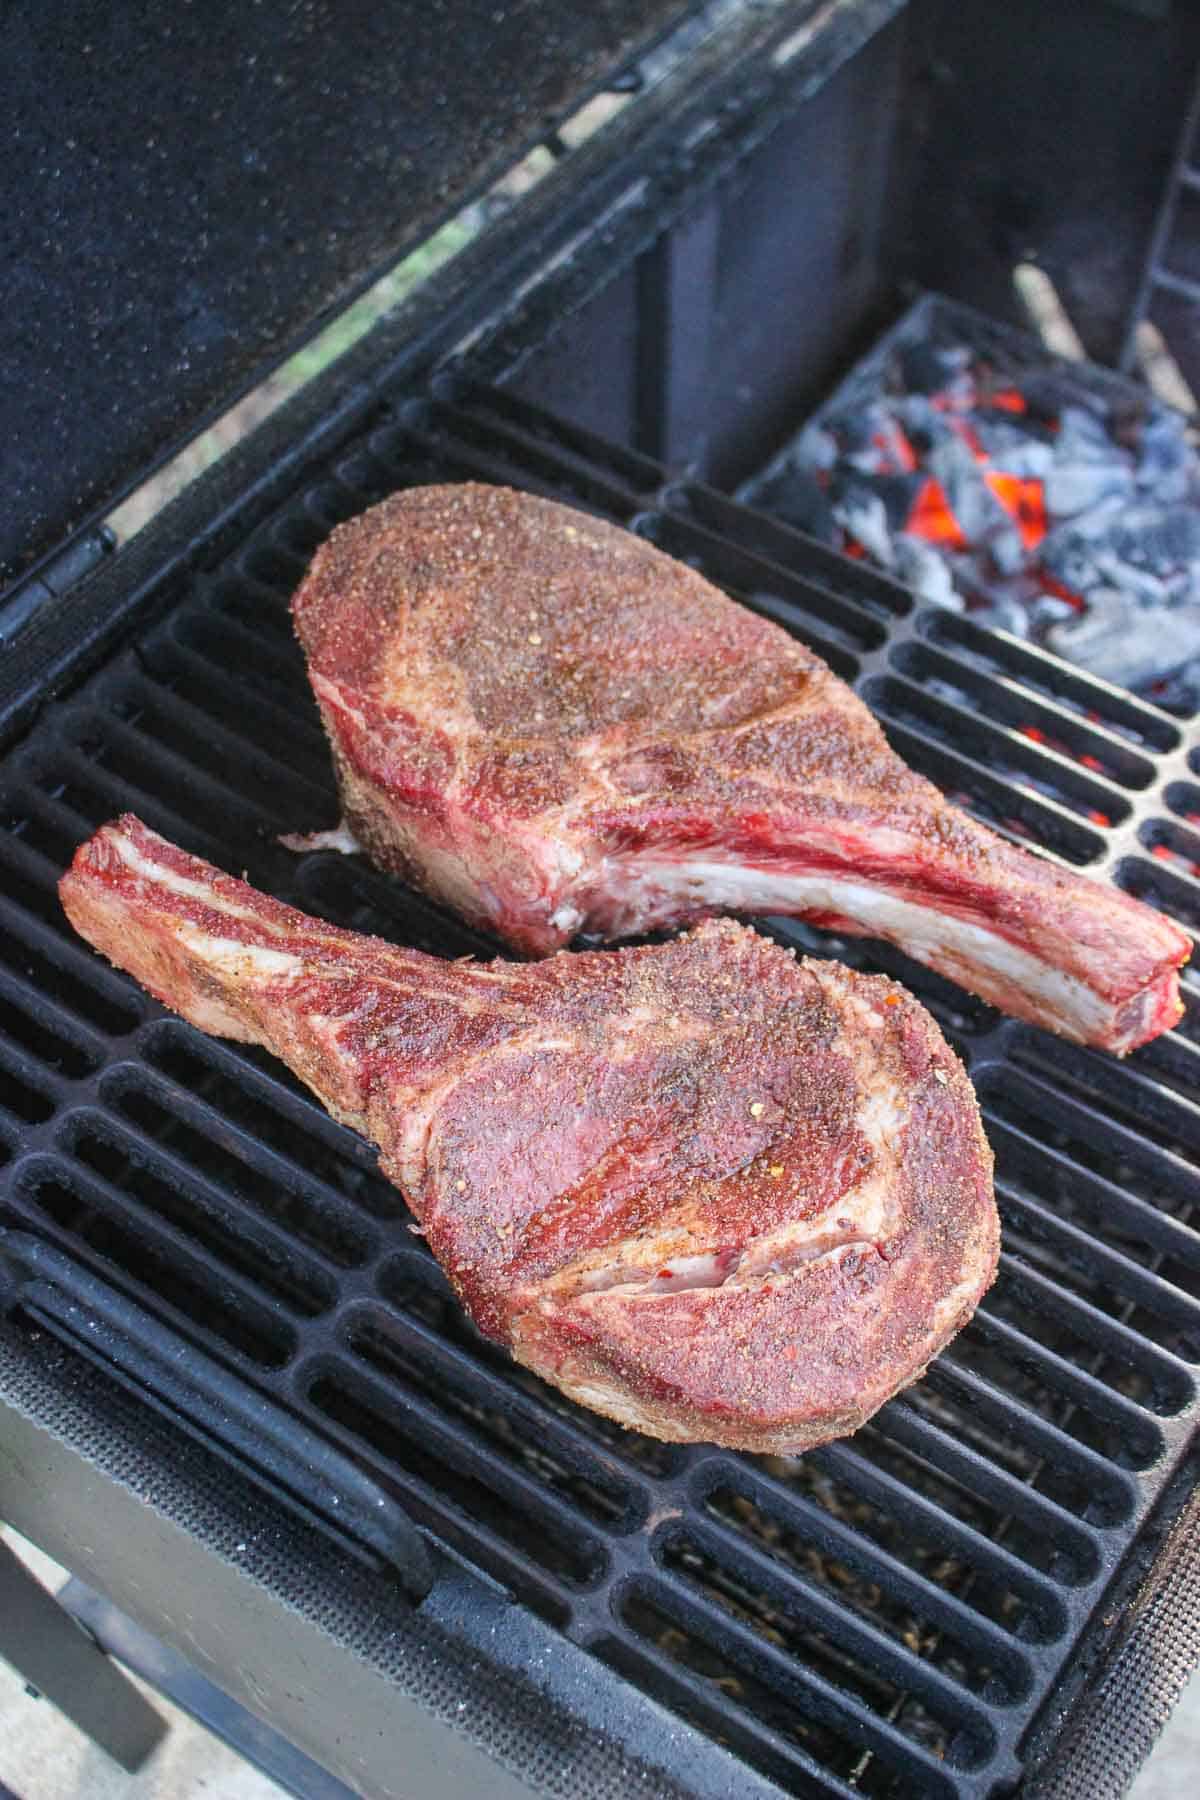 The raw steaks being placed the grill.